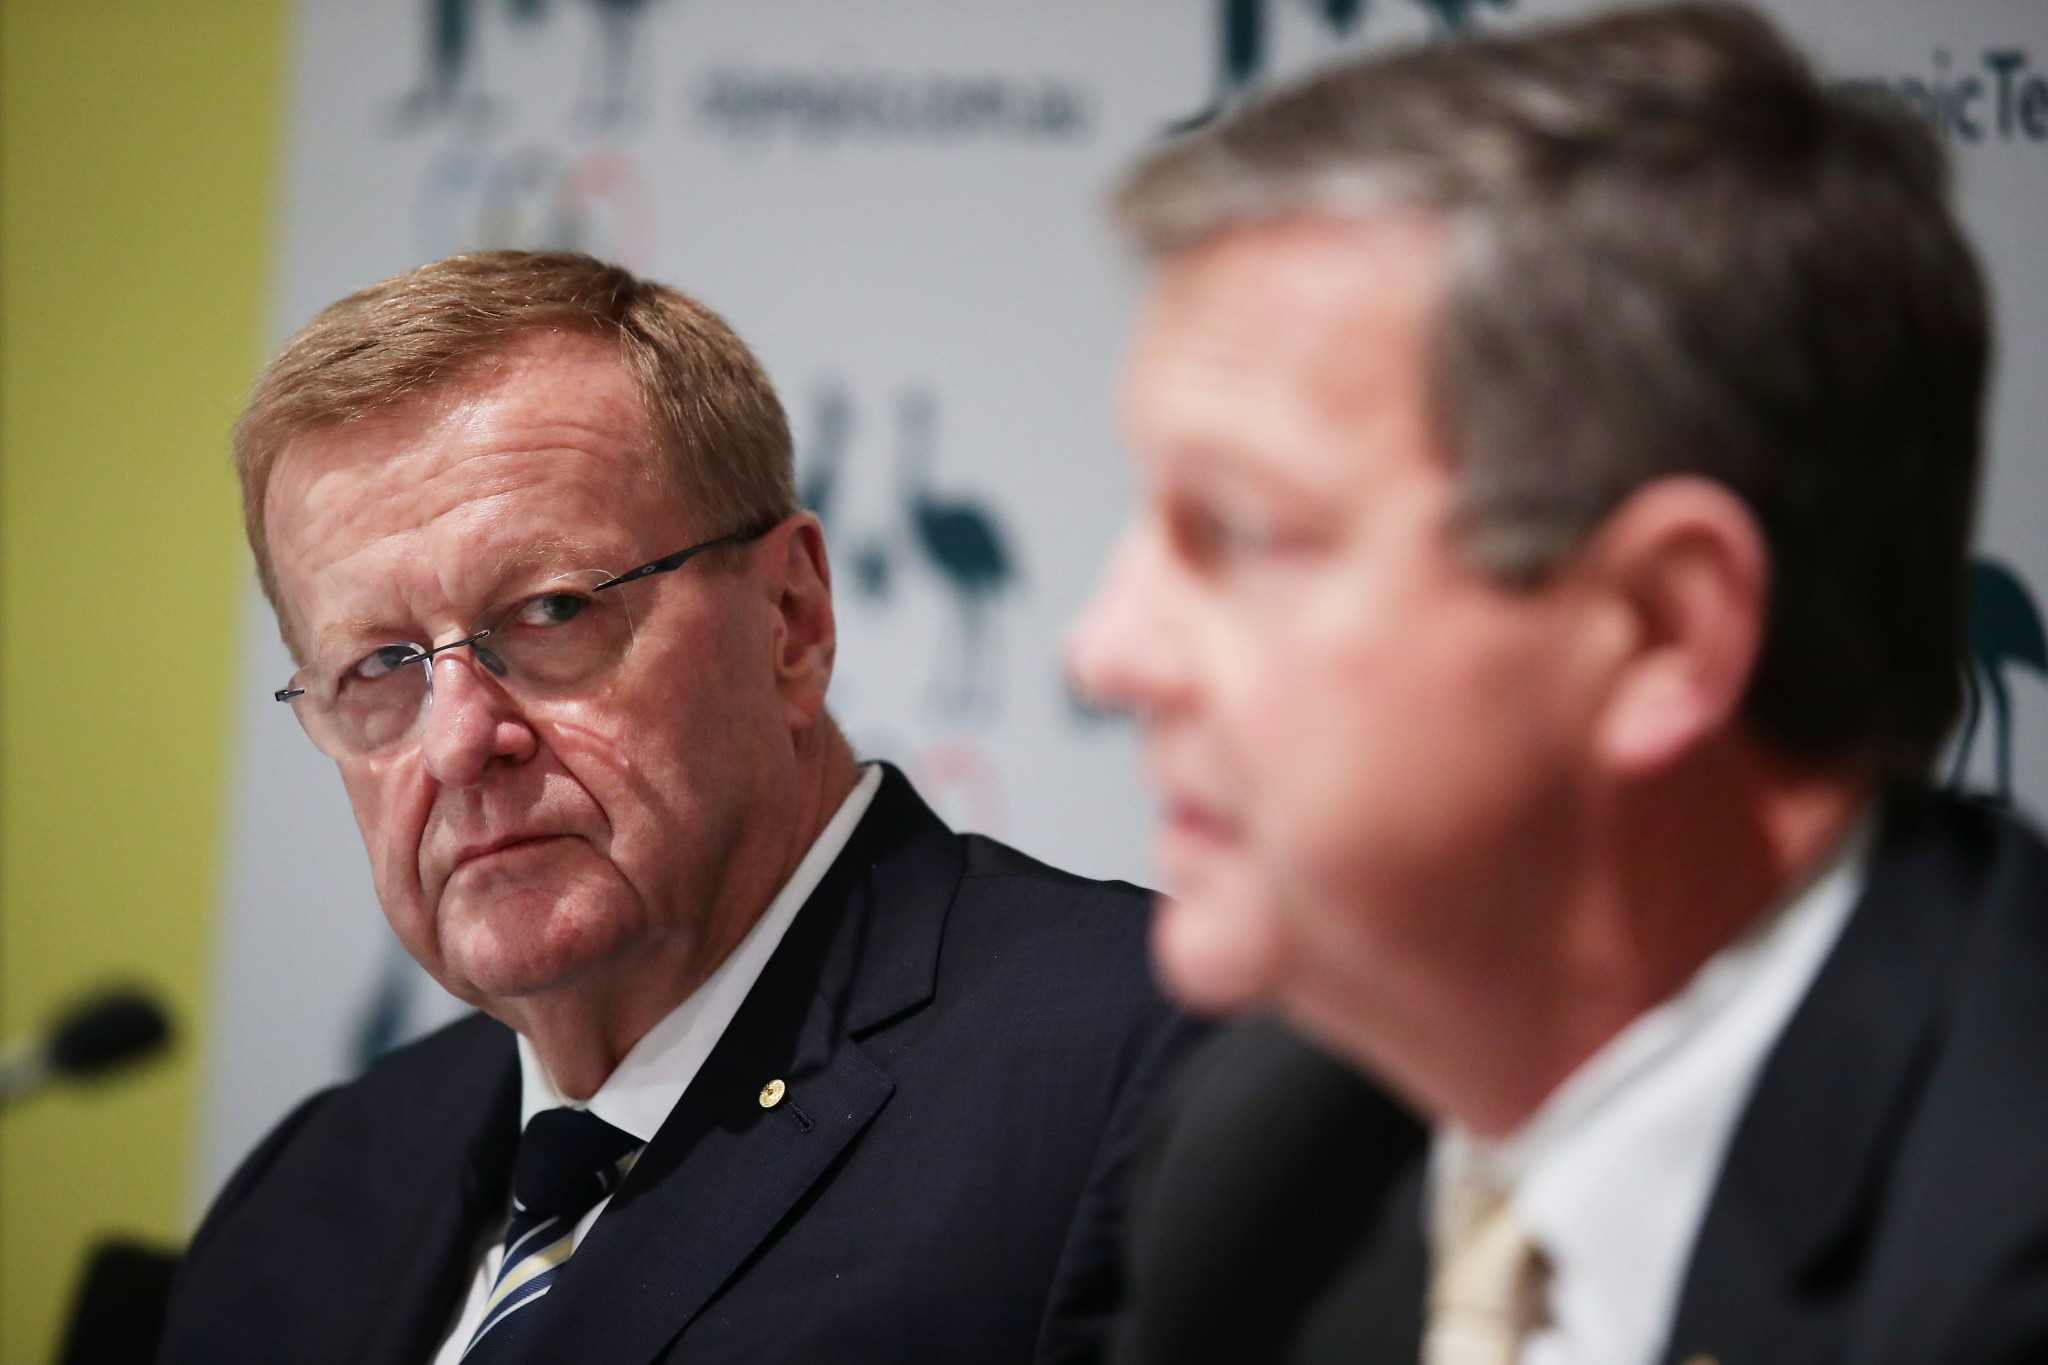 John Coates rejected any suggestion he was responsible for the cultural issues at the AOC ©Getty Images